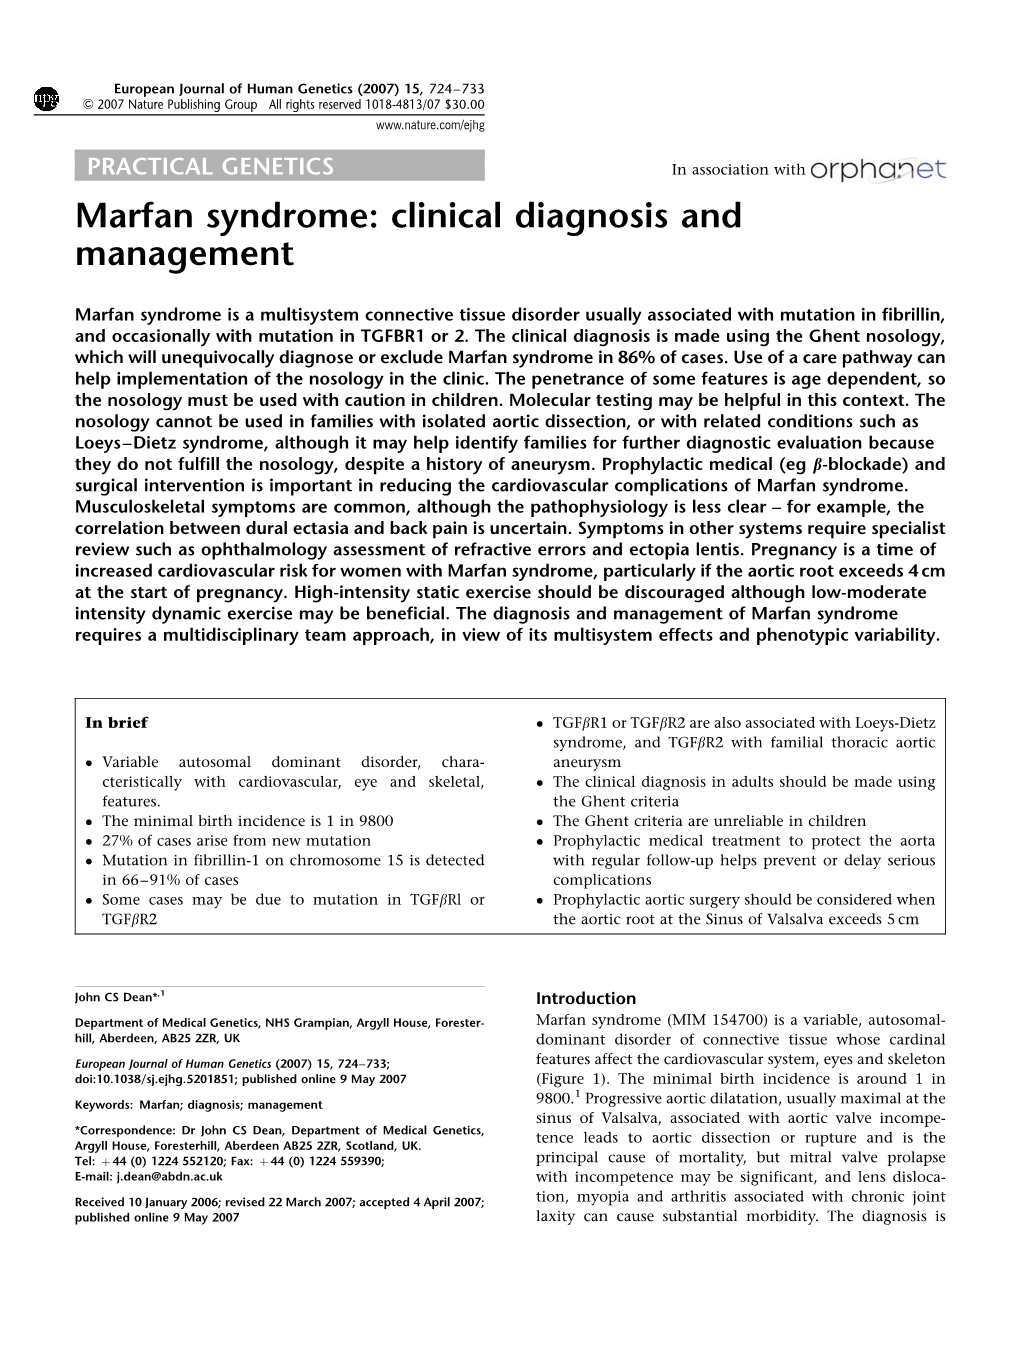 Marfan Syndrome: Clinical Diagnosis and Management